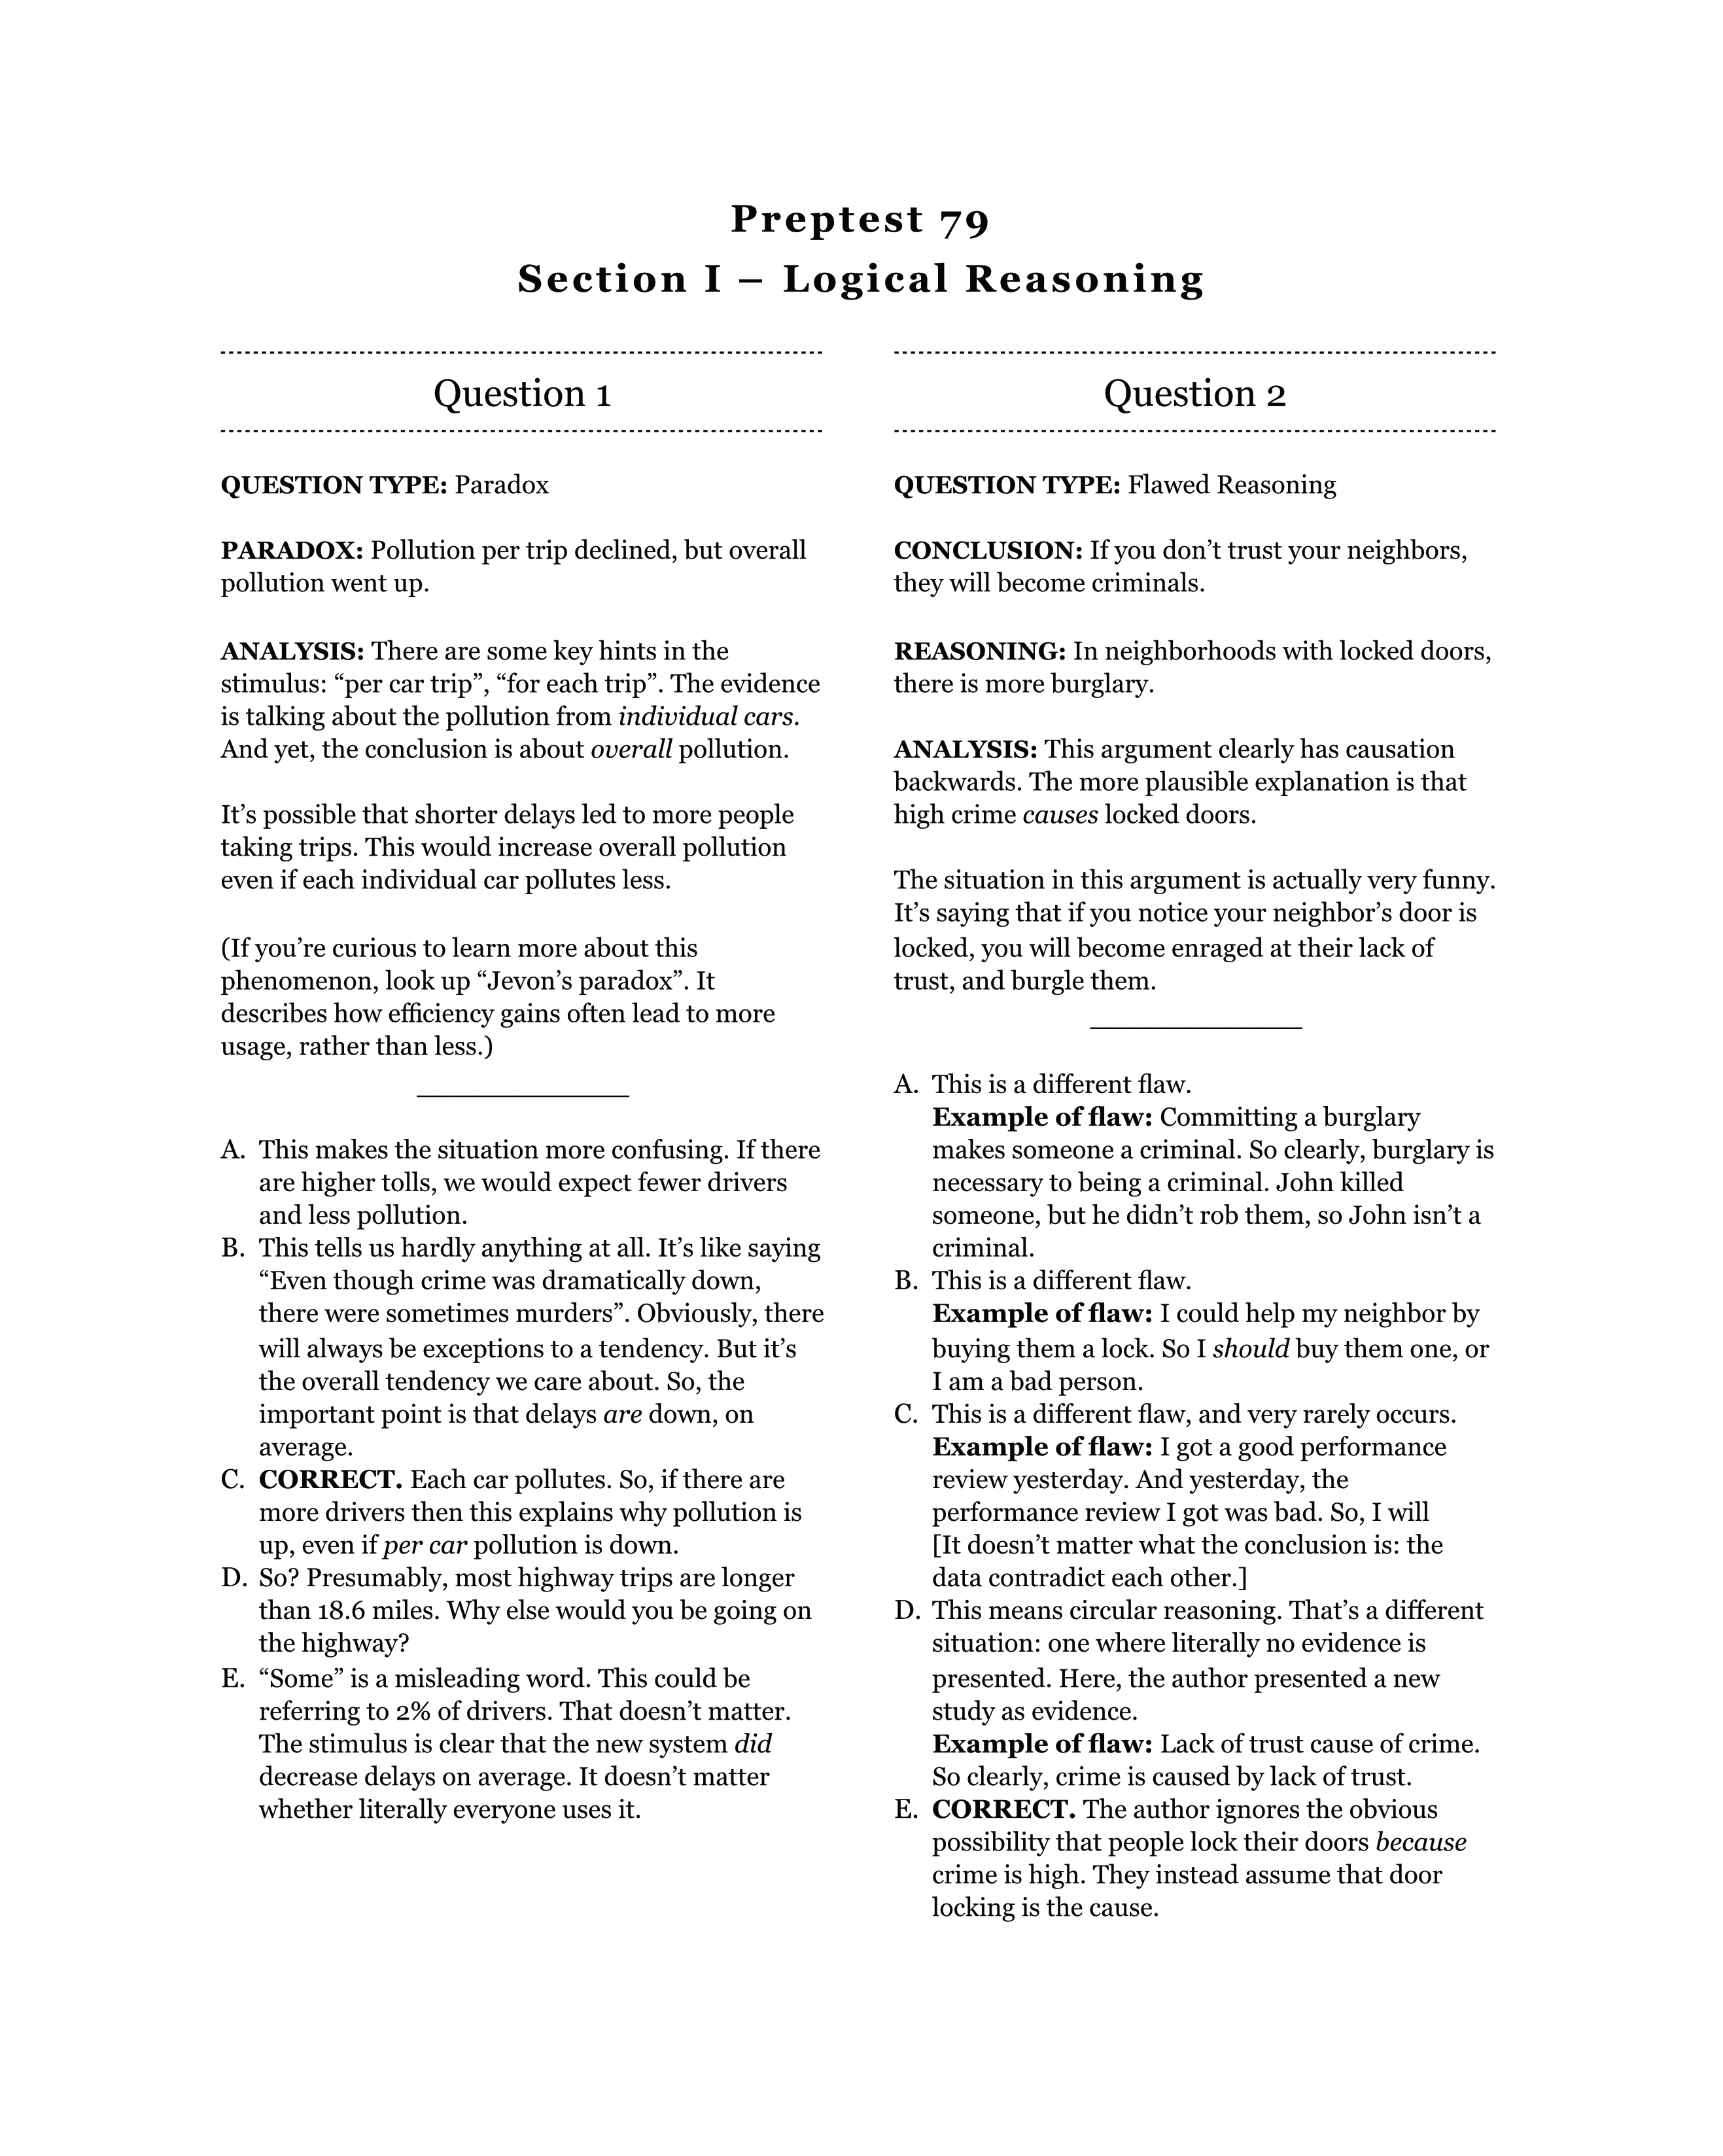 PrepTest 79 Logical Reasoning A (Section 1) Explanations